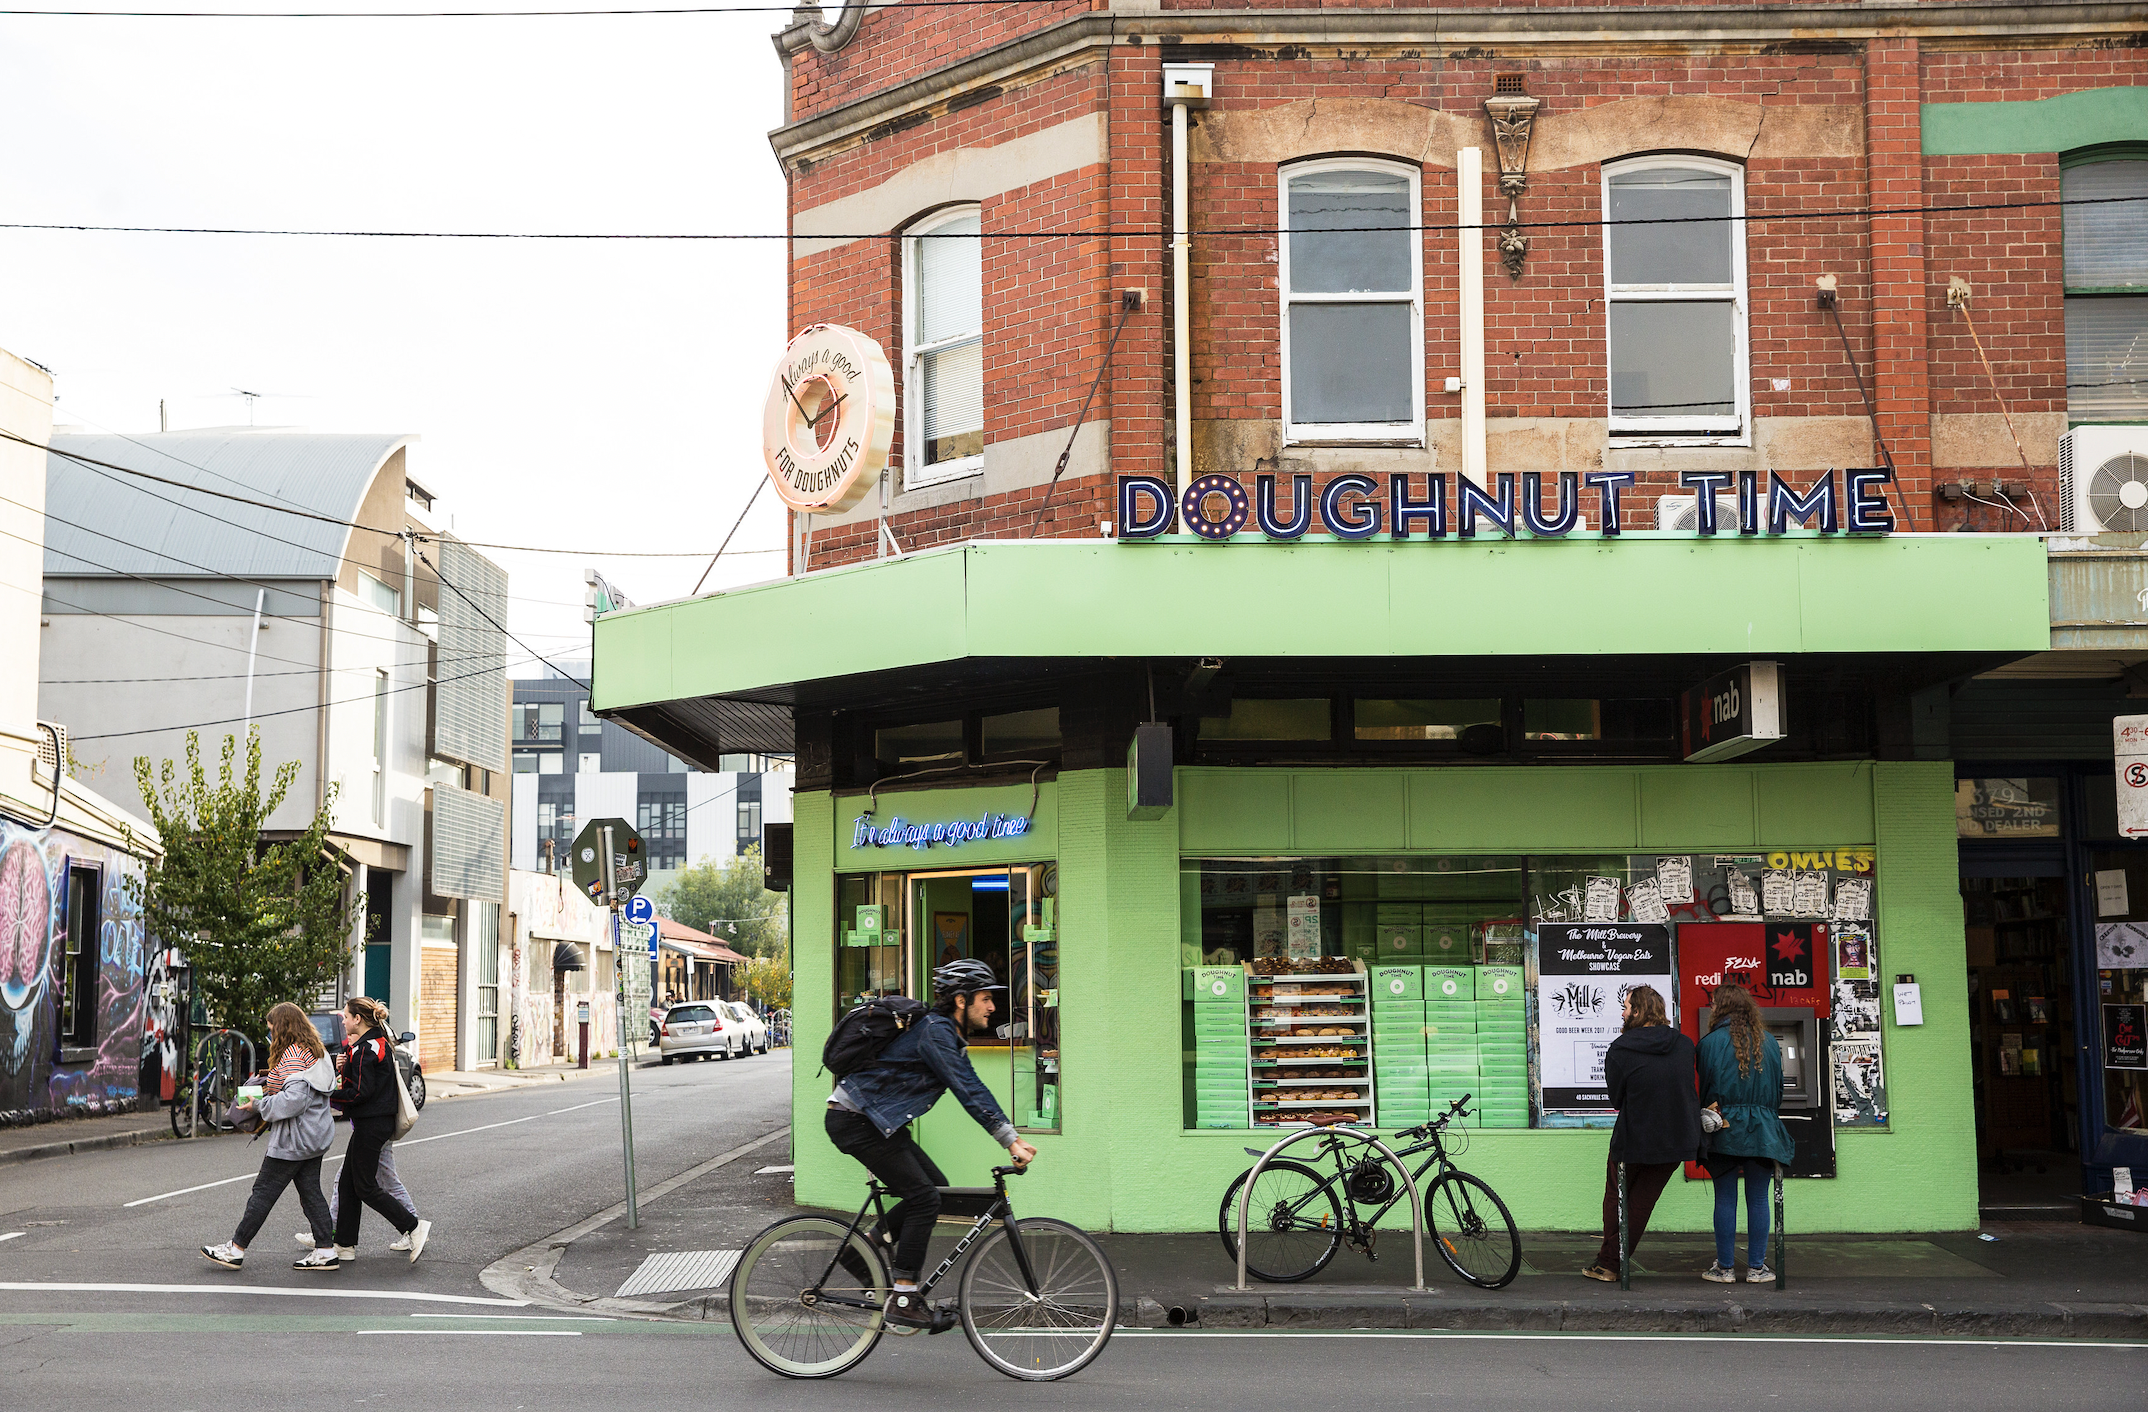 Suburbs like Brunswick East in Melbourne are in high demand. Credit: Visit Victoria